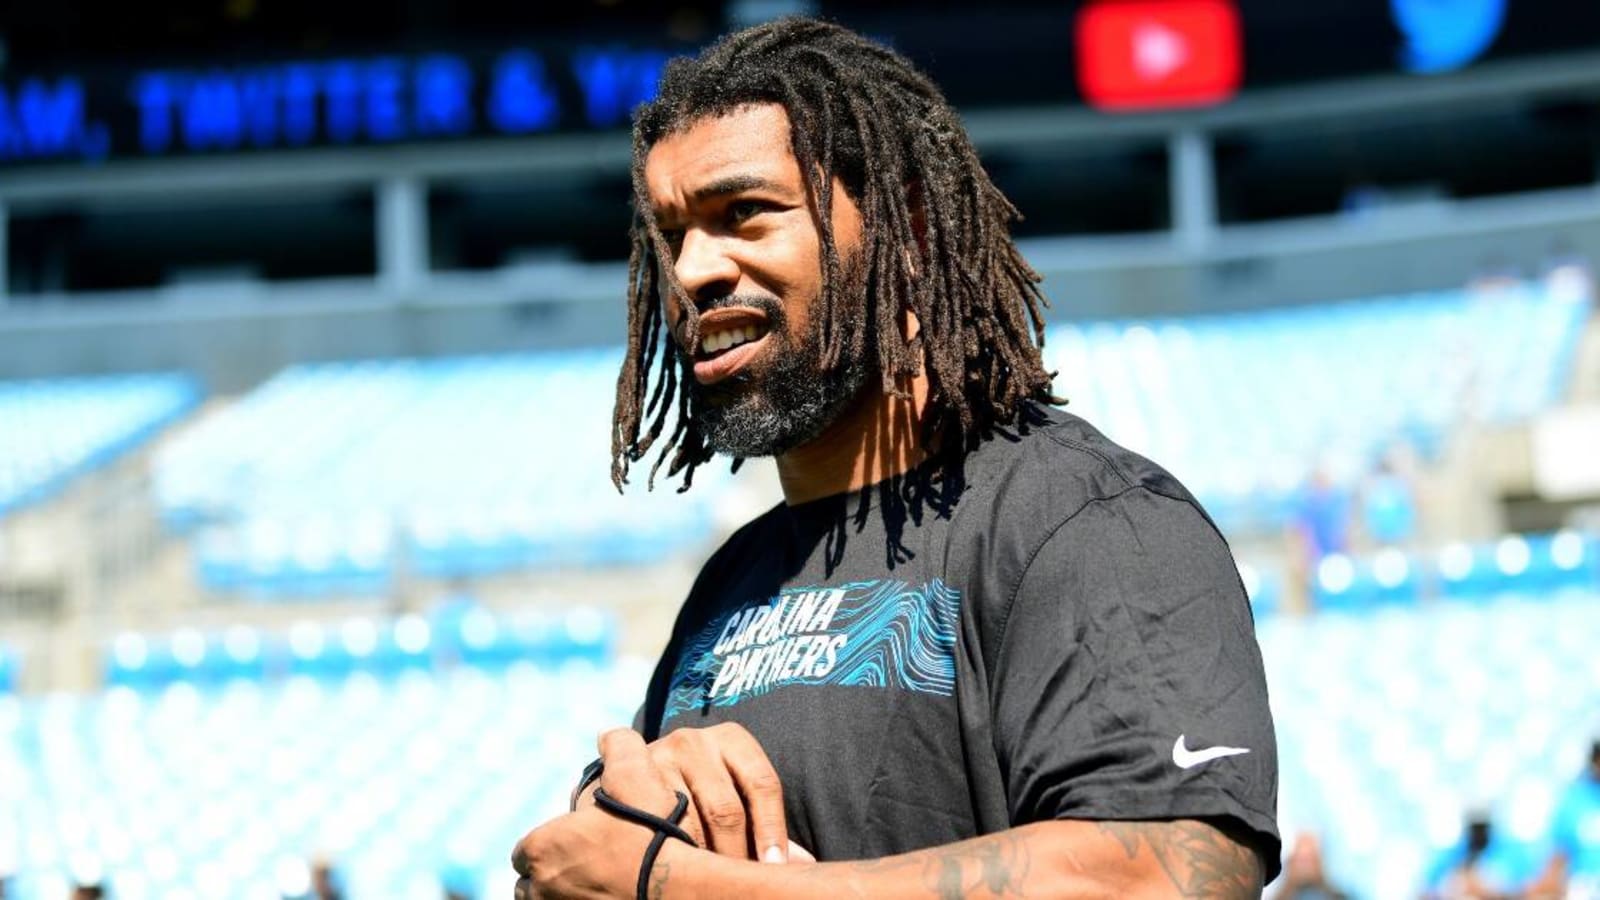 Carolina Panthers announce inductions of Julius Peppers, Muhsin Muhammad to Hall of Honor